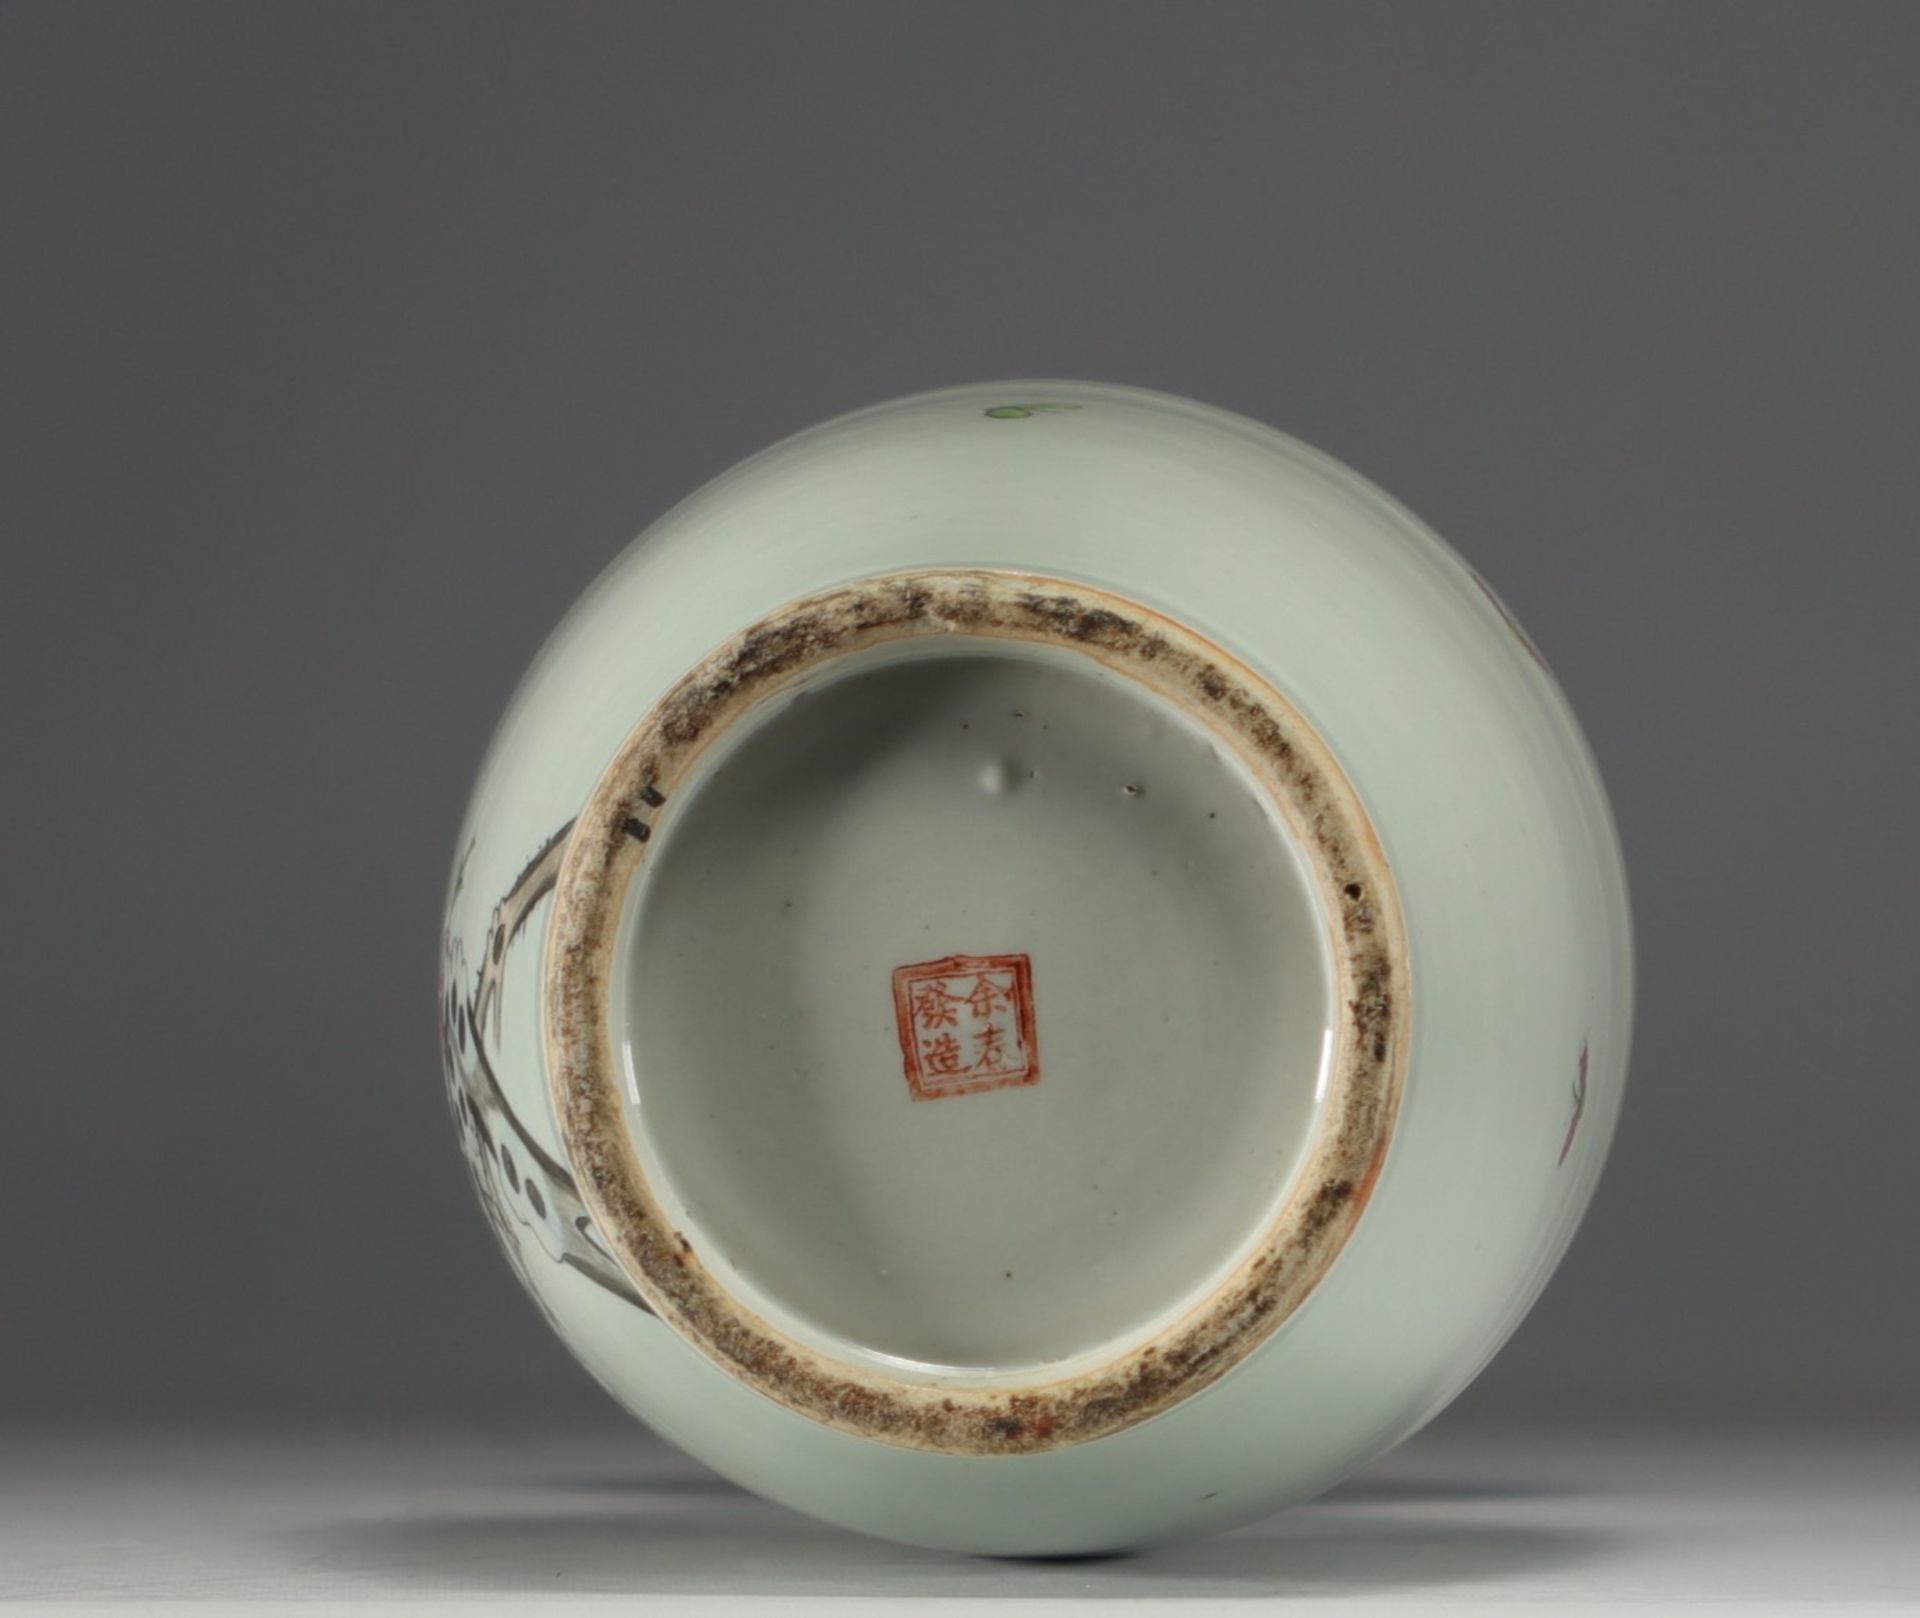 China - Porcelain vase decorated with birds and floral motifs - 20th century - Image 3 of 3